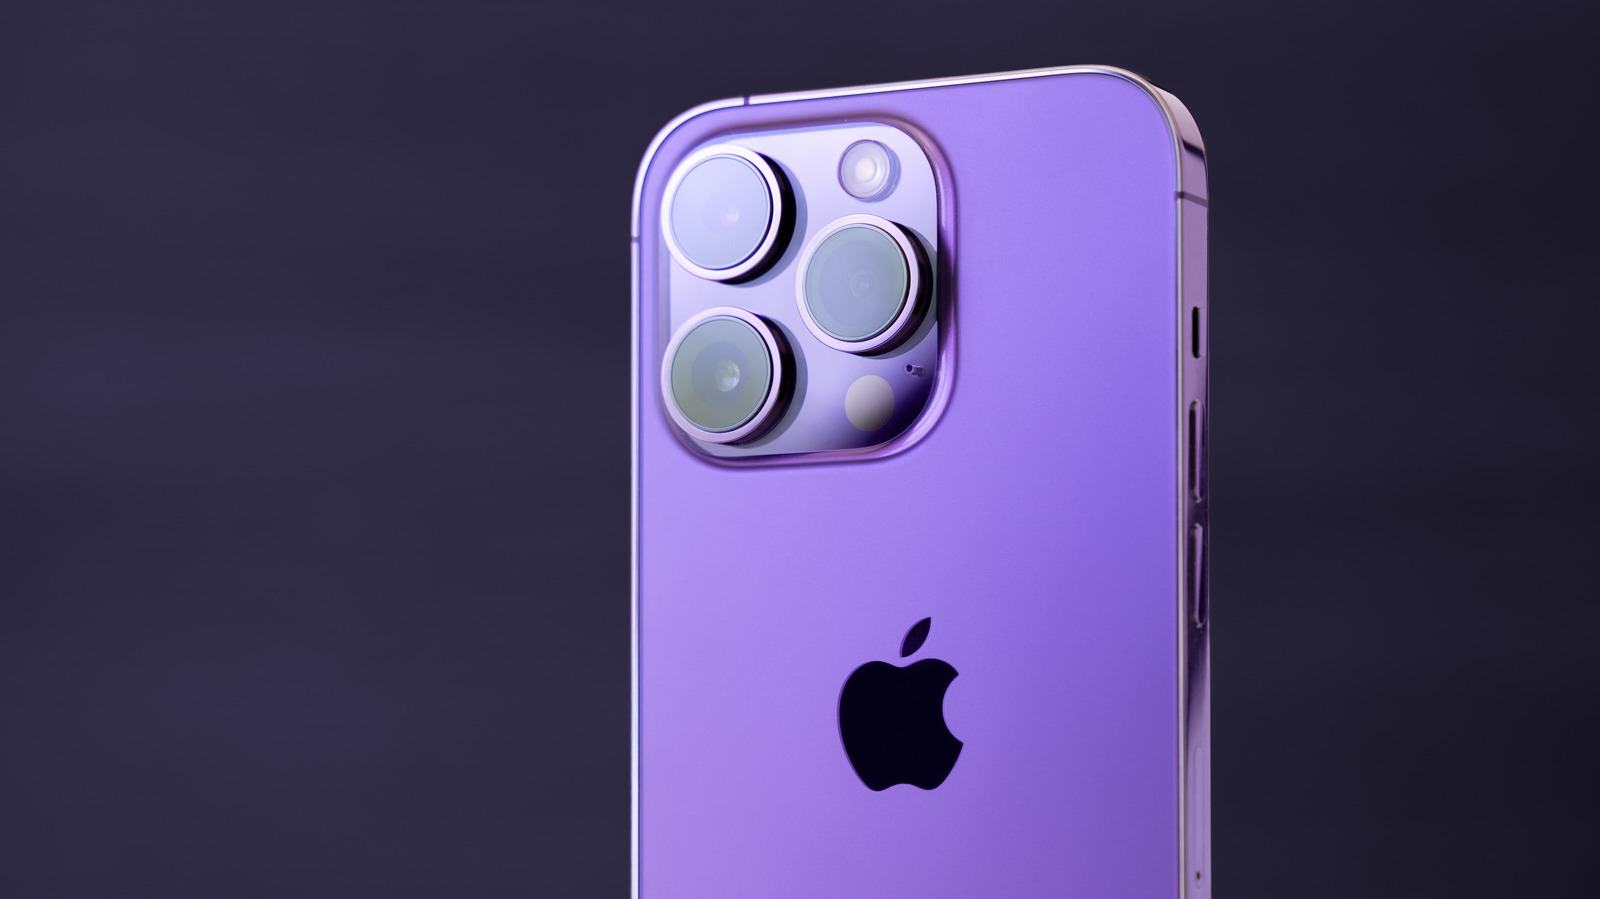 Camera Count: Identifying The Number Of Cameras On IPhone 14